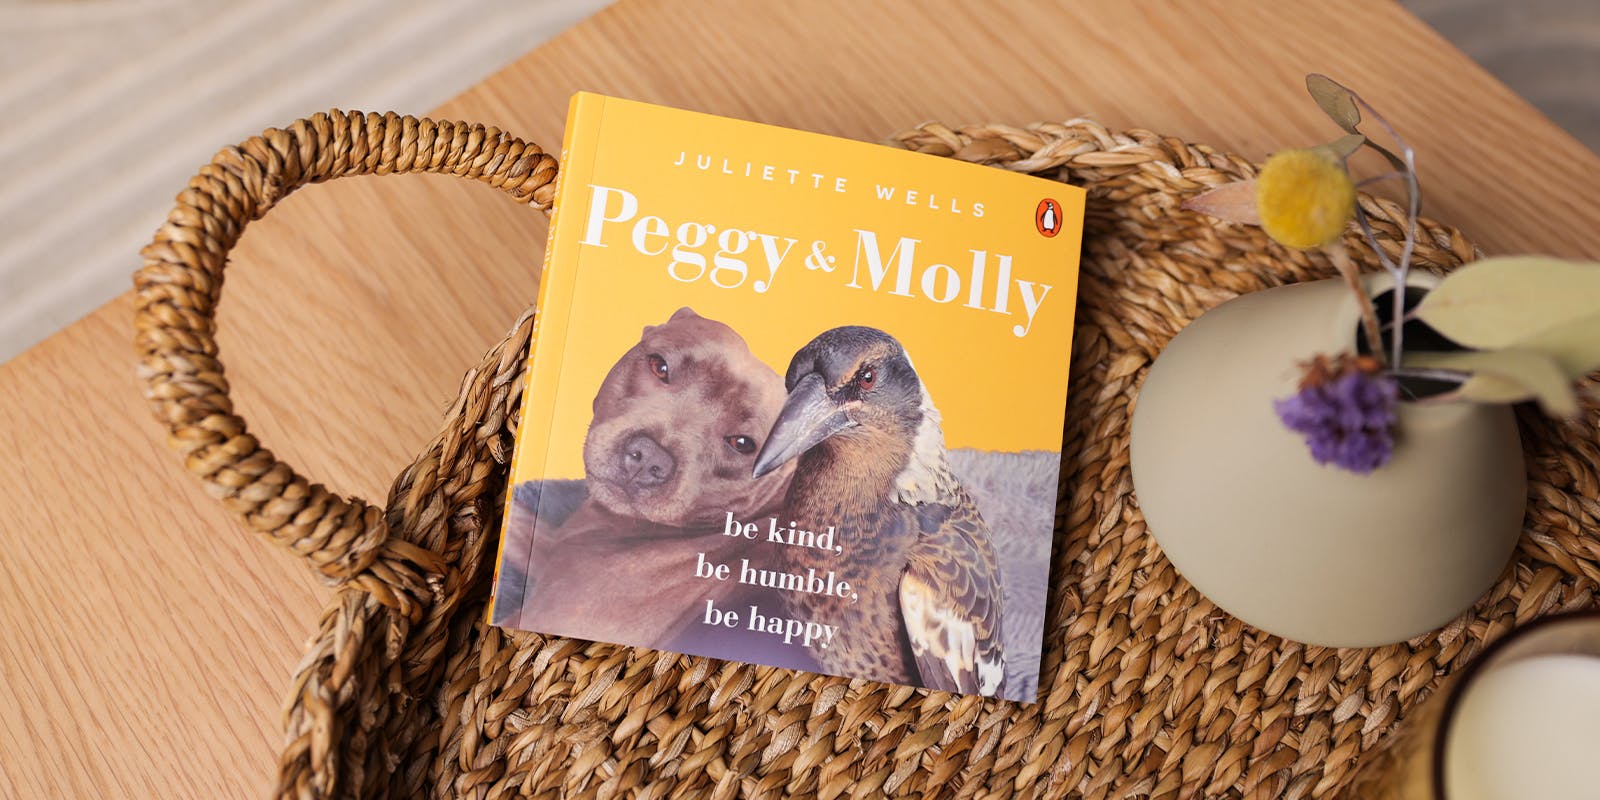 Look inside Peggy and Molly